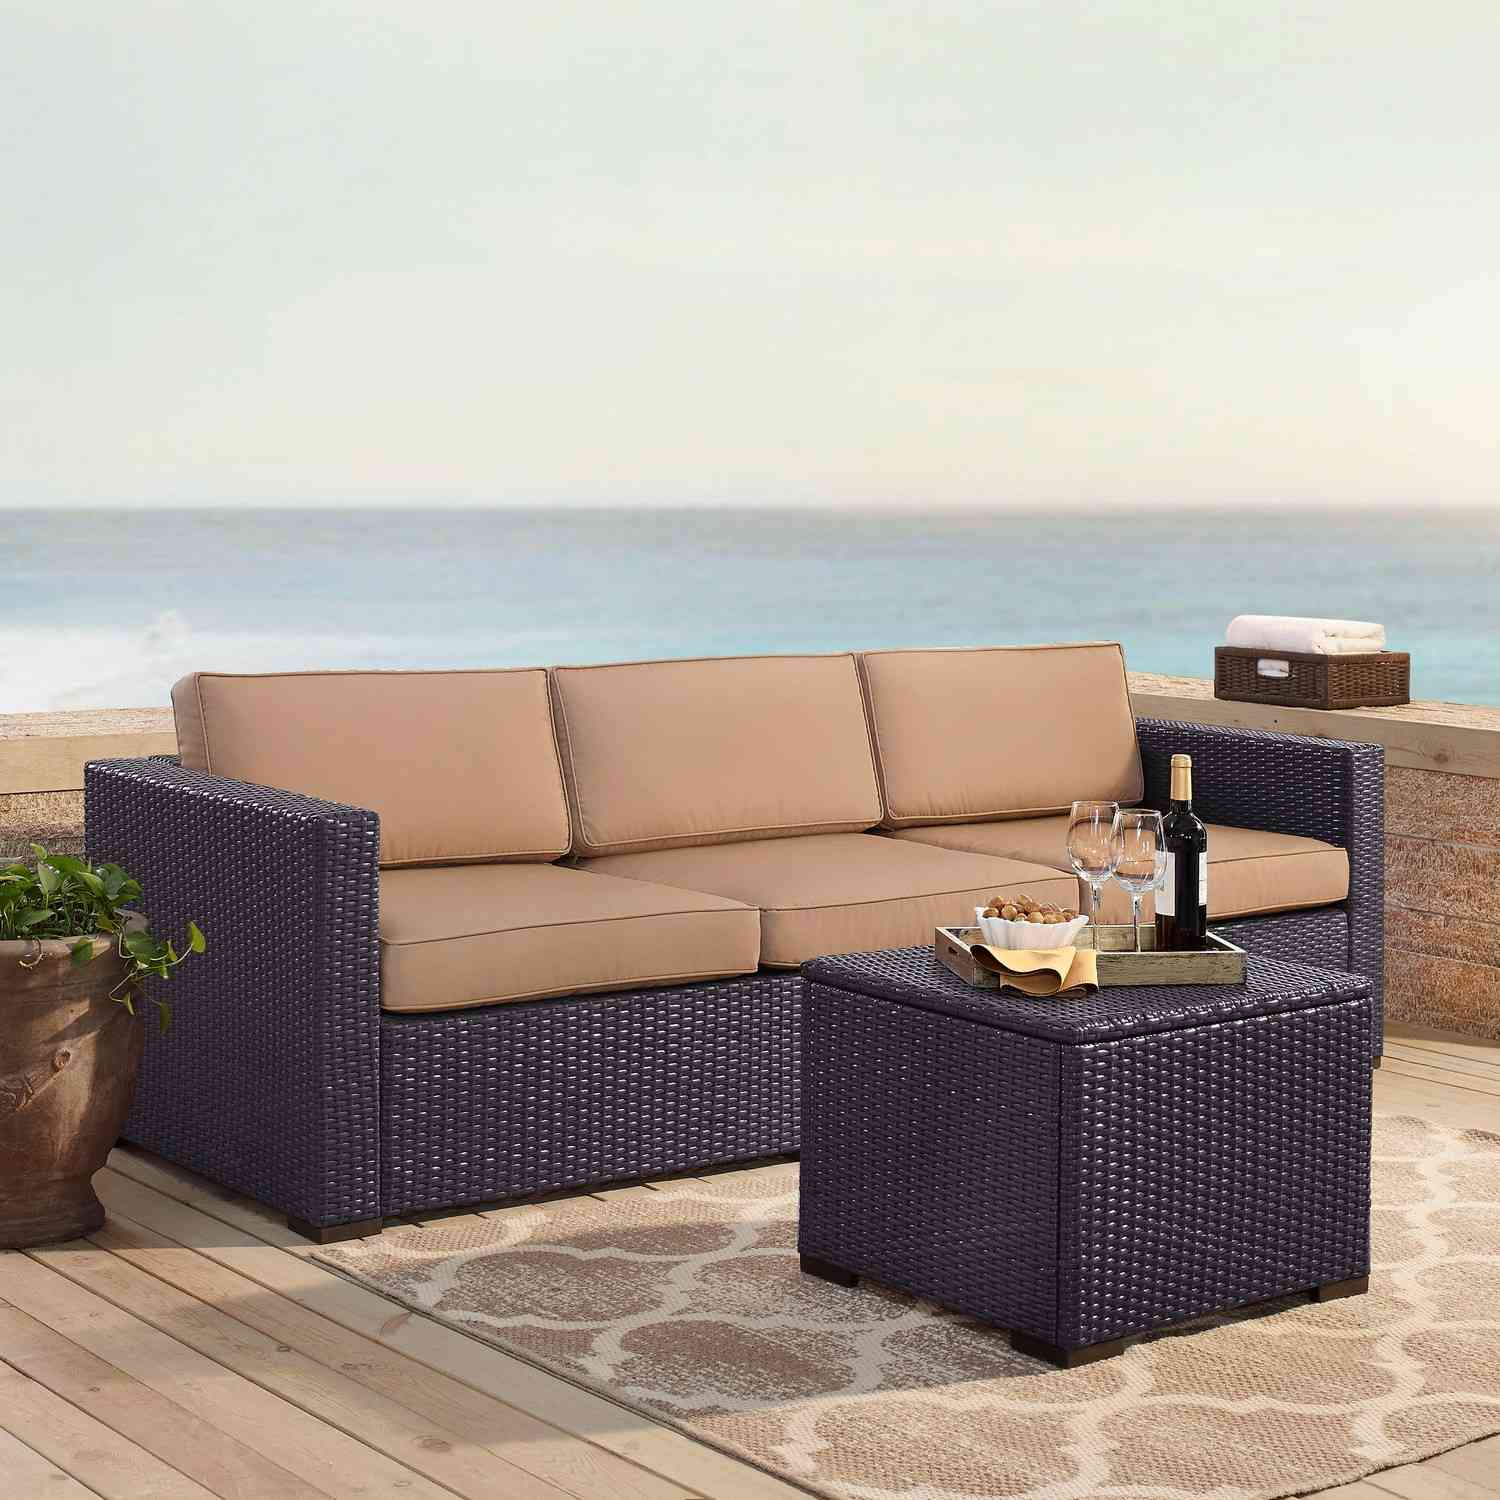 Crosley Biscayne 3-PC Outdoor Wicker Sectional Set - Loveseat, Corner Chair, Coffee Table - Mocha/Brown